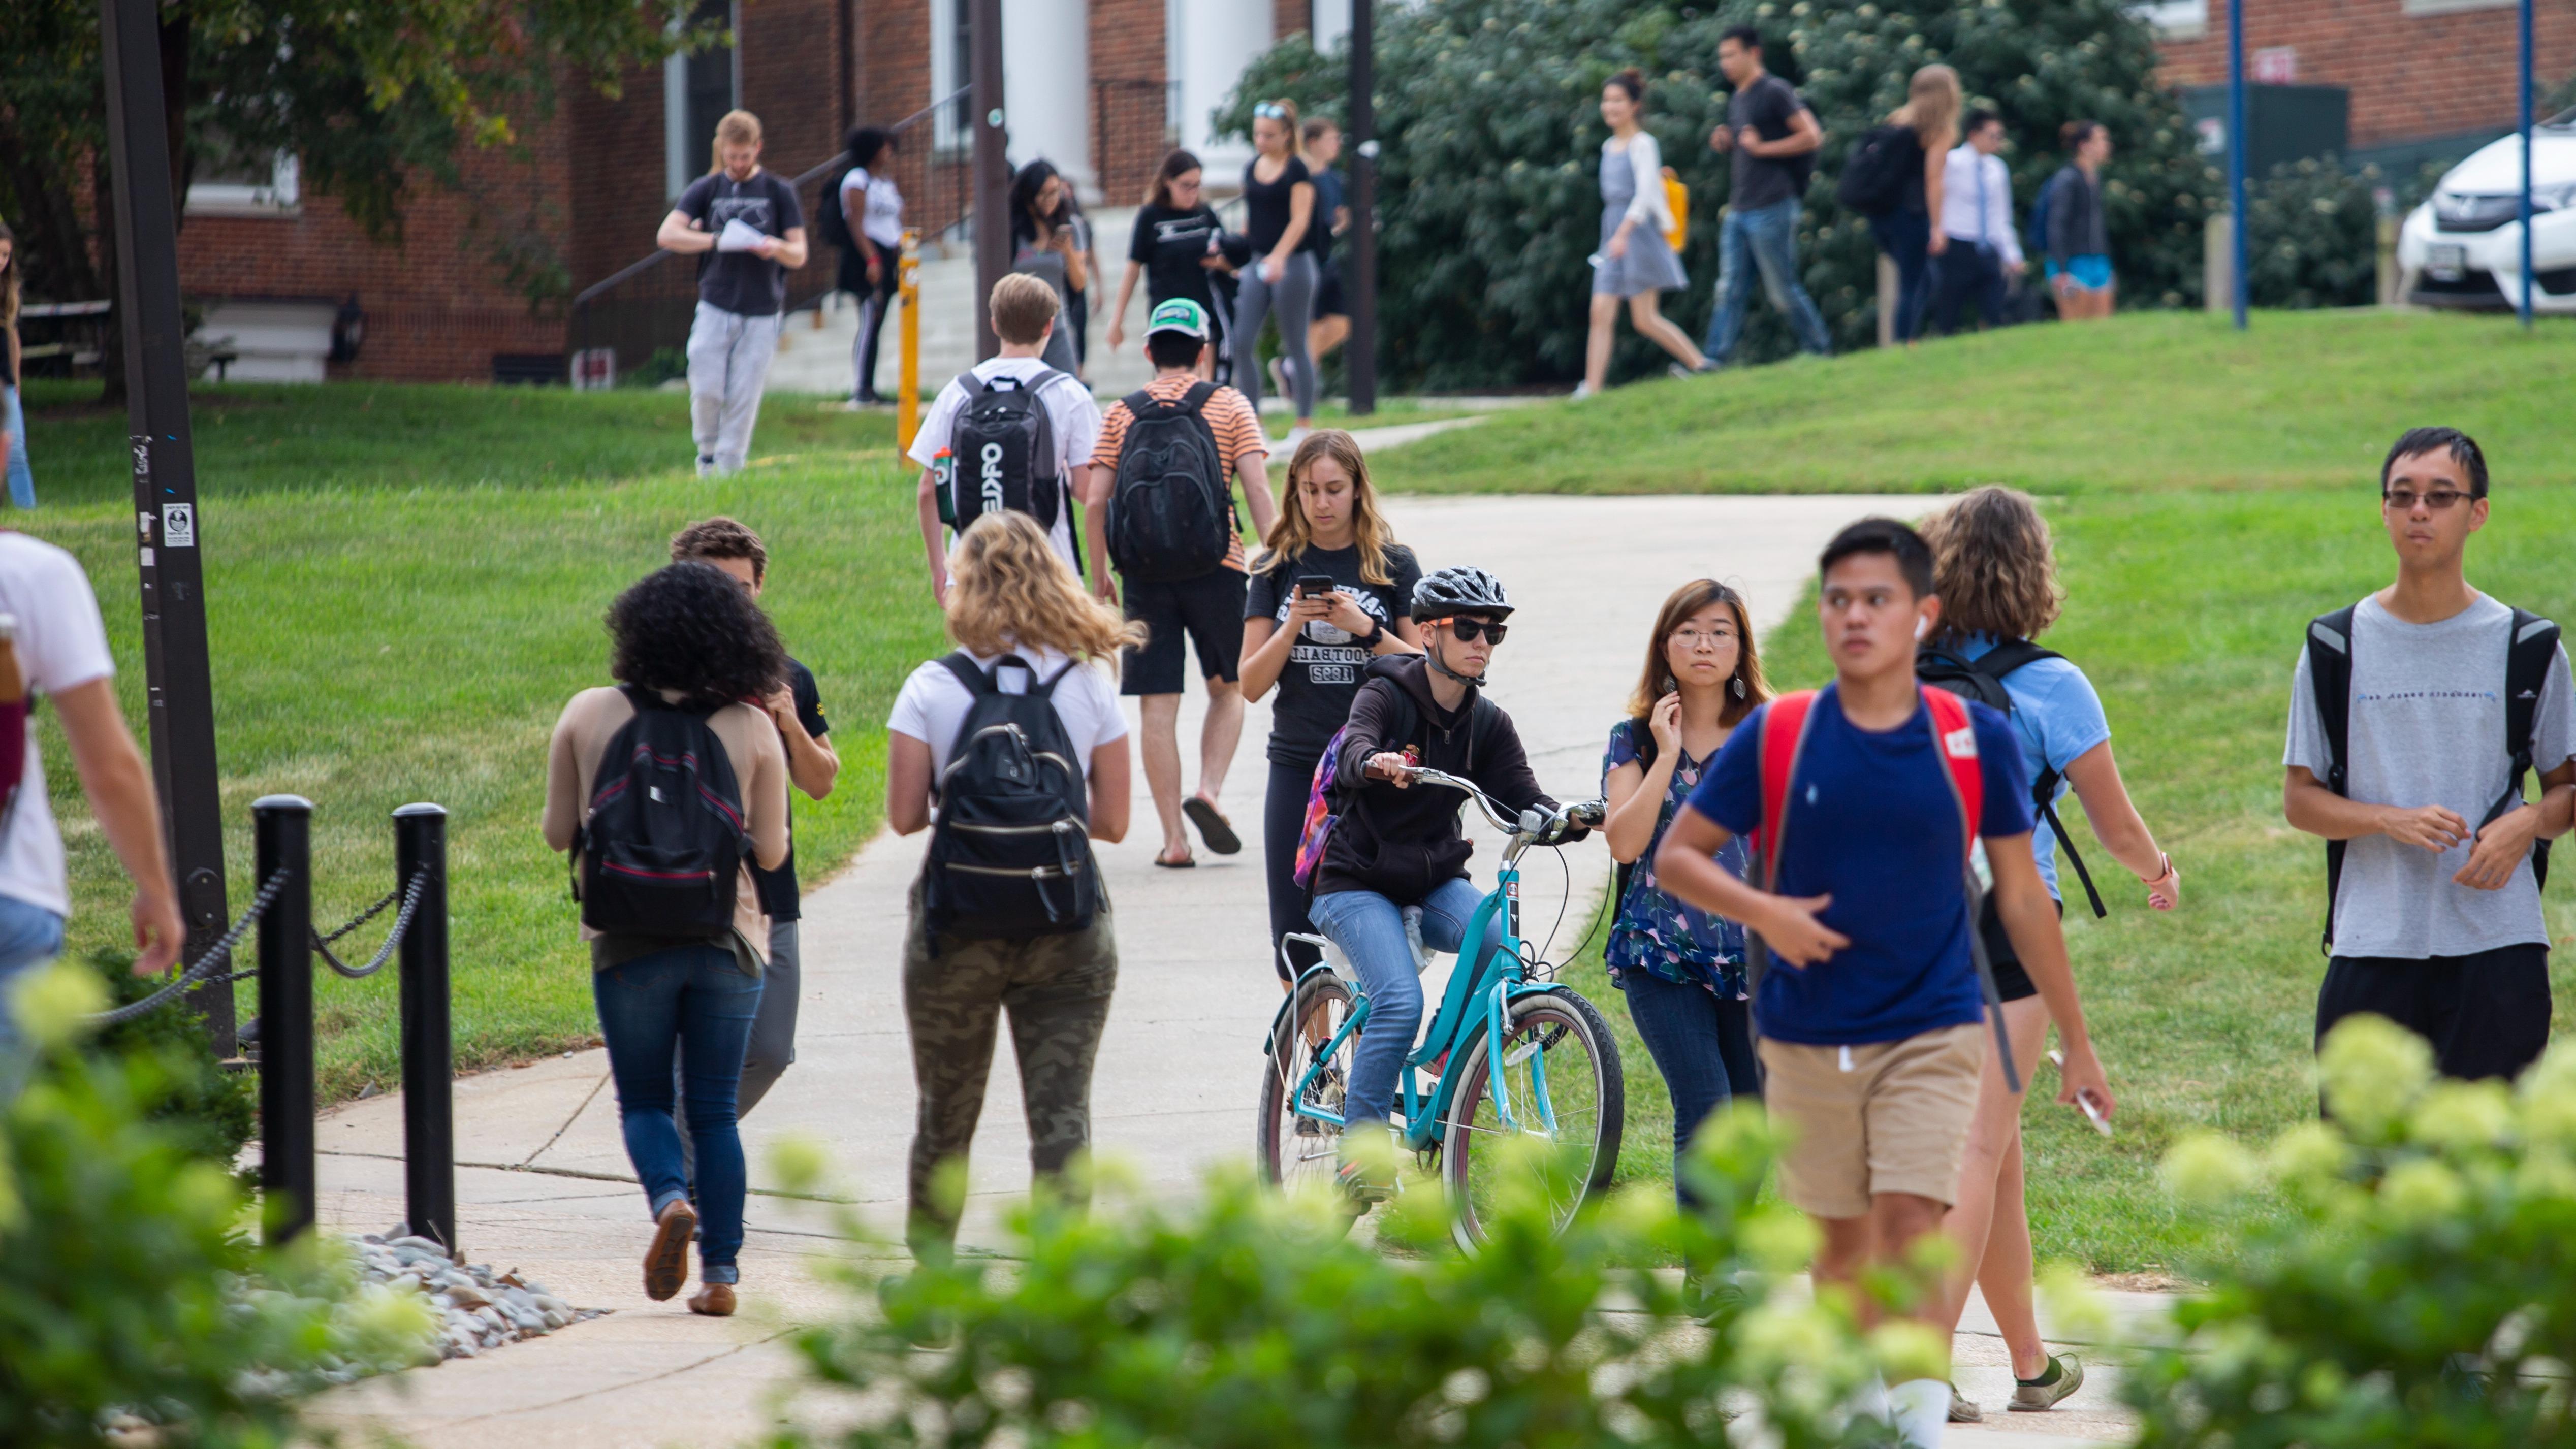 Students talk in groups and walk on campus.